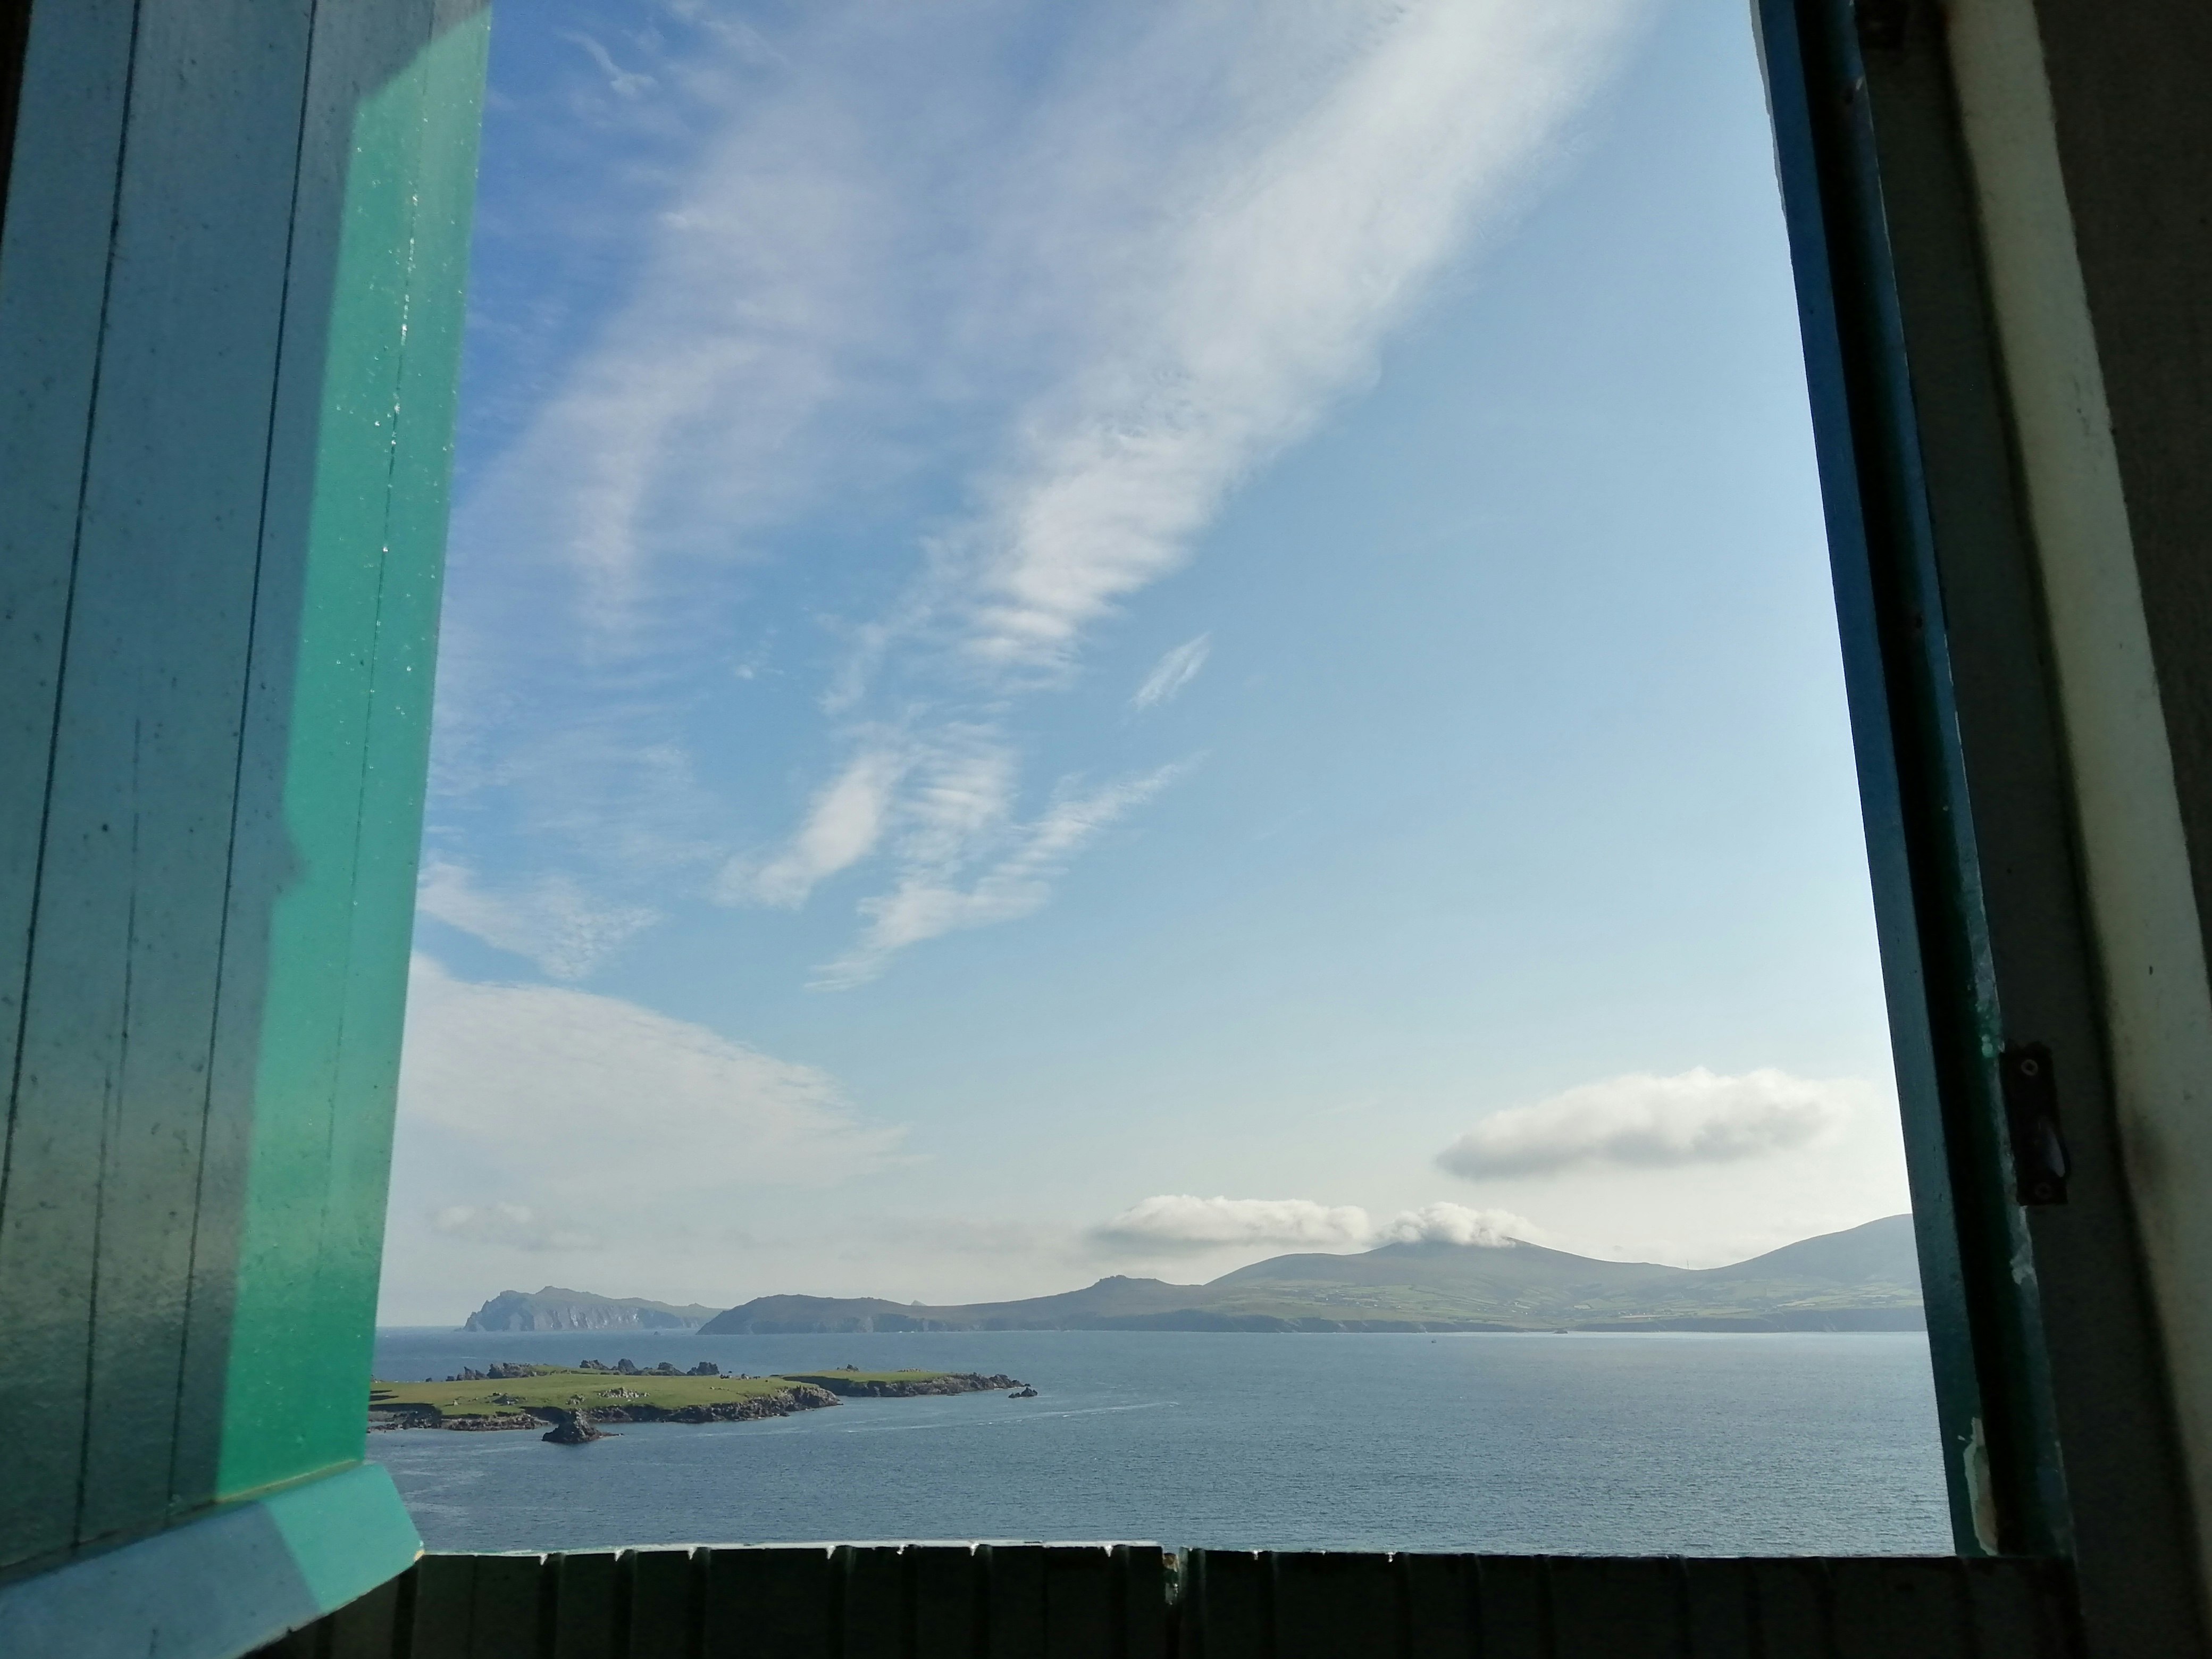 Views over The Great Blasket from the window of the caretakers cottage